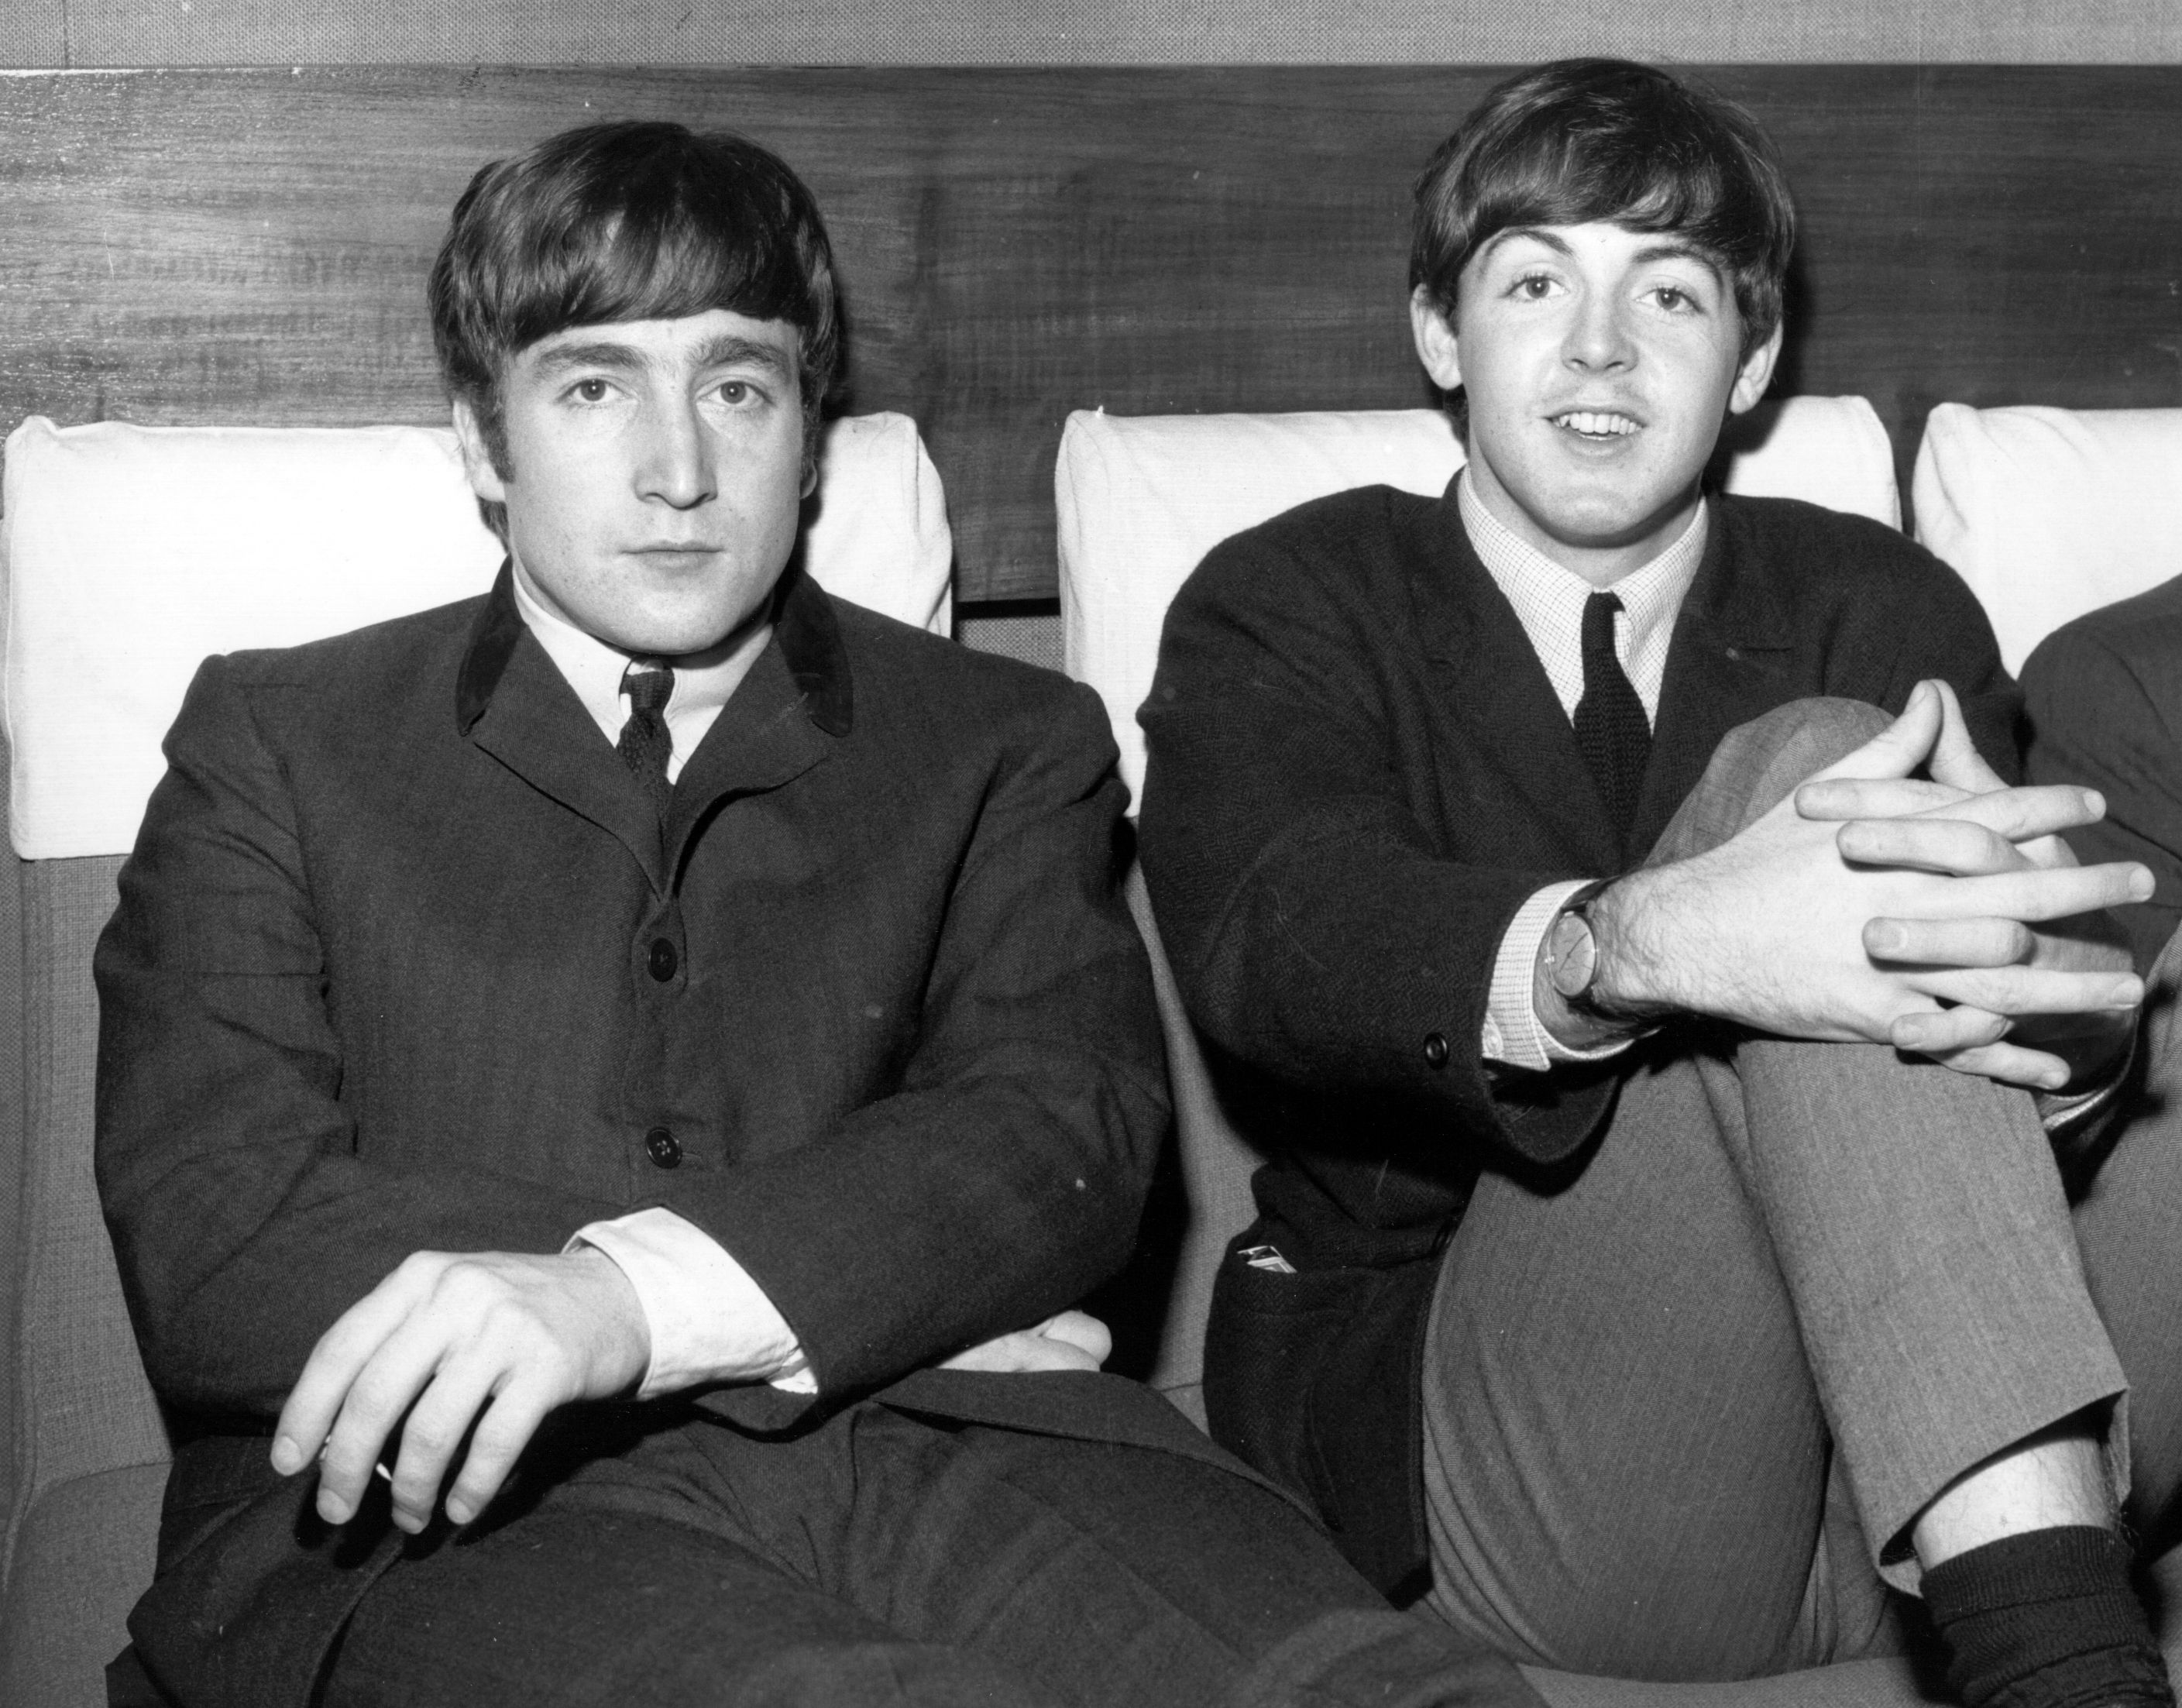 A black and white picture of John Lennon and Paul McCartney wearing suits and sitting on a couch.